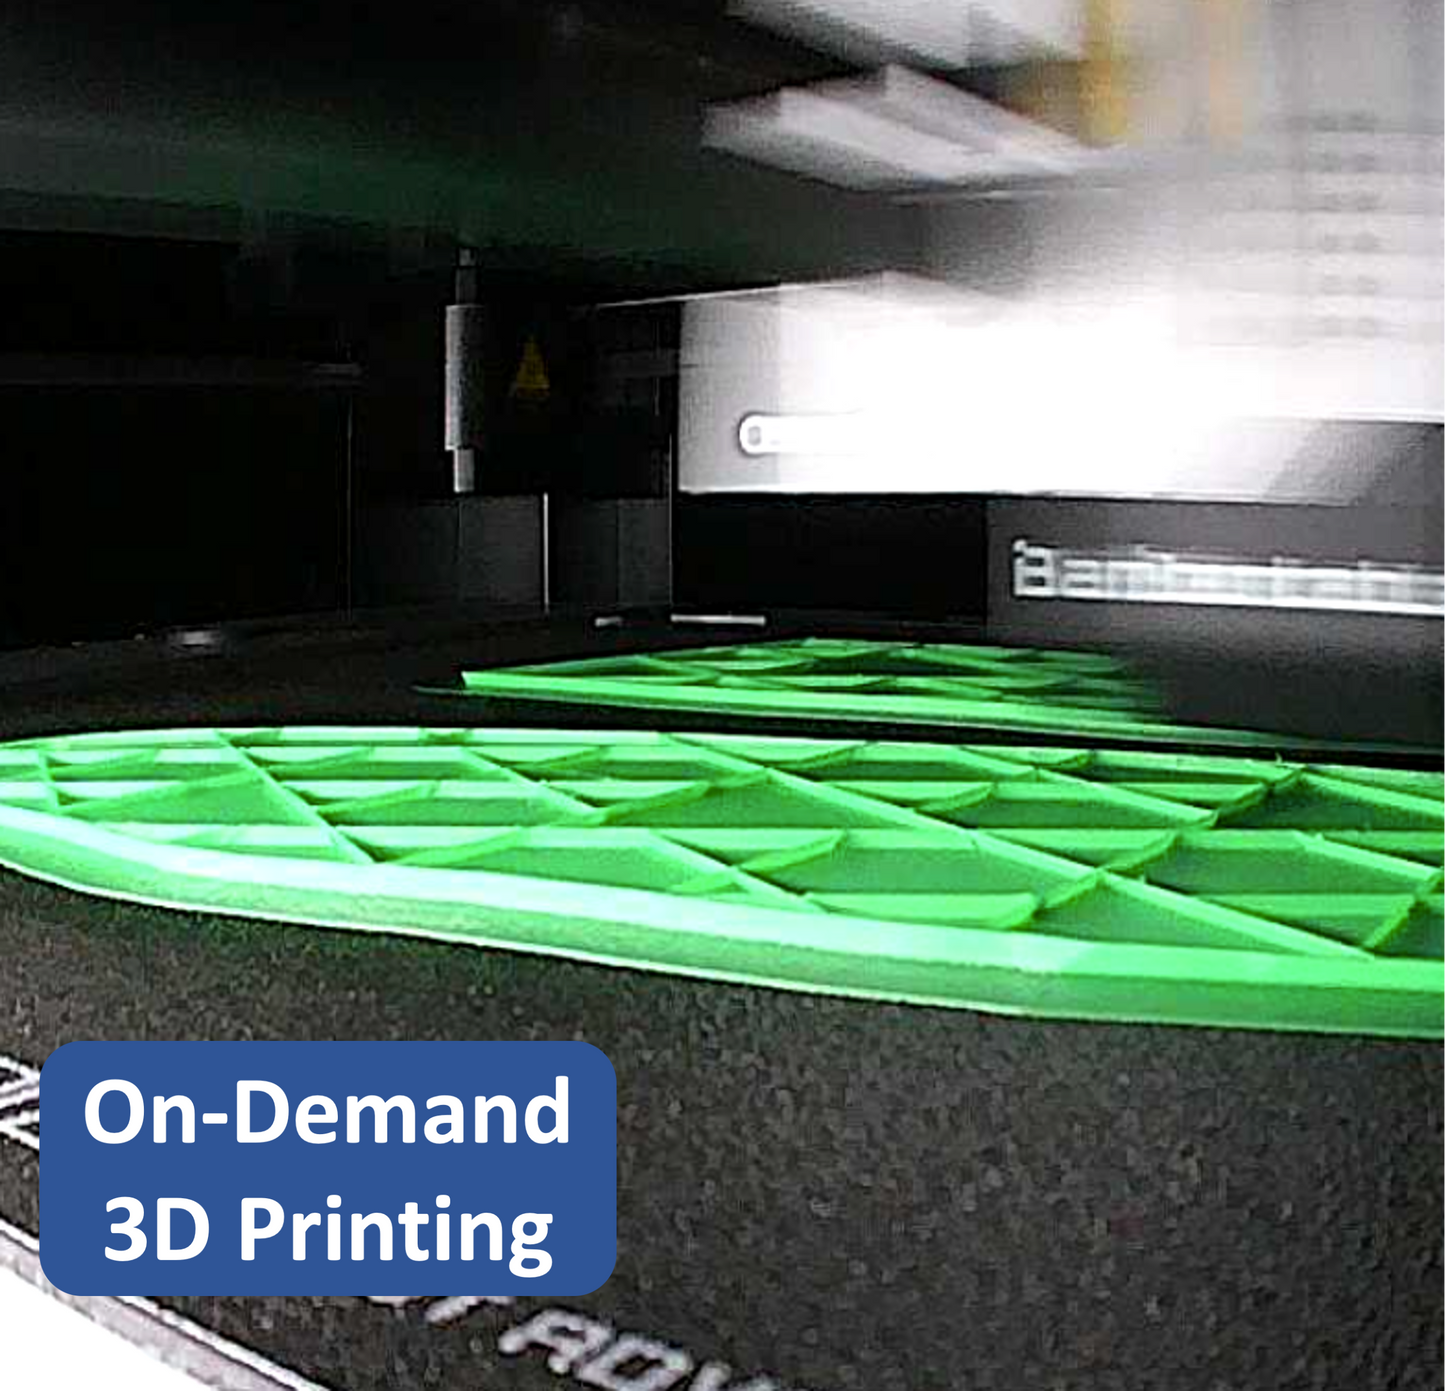 SprinSole custom orthotics, rapid production in USA with on-demand 3D printing